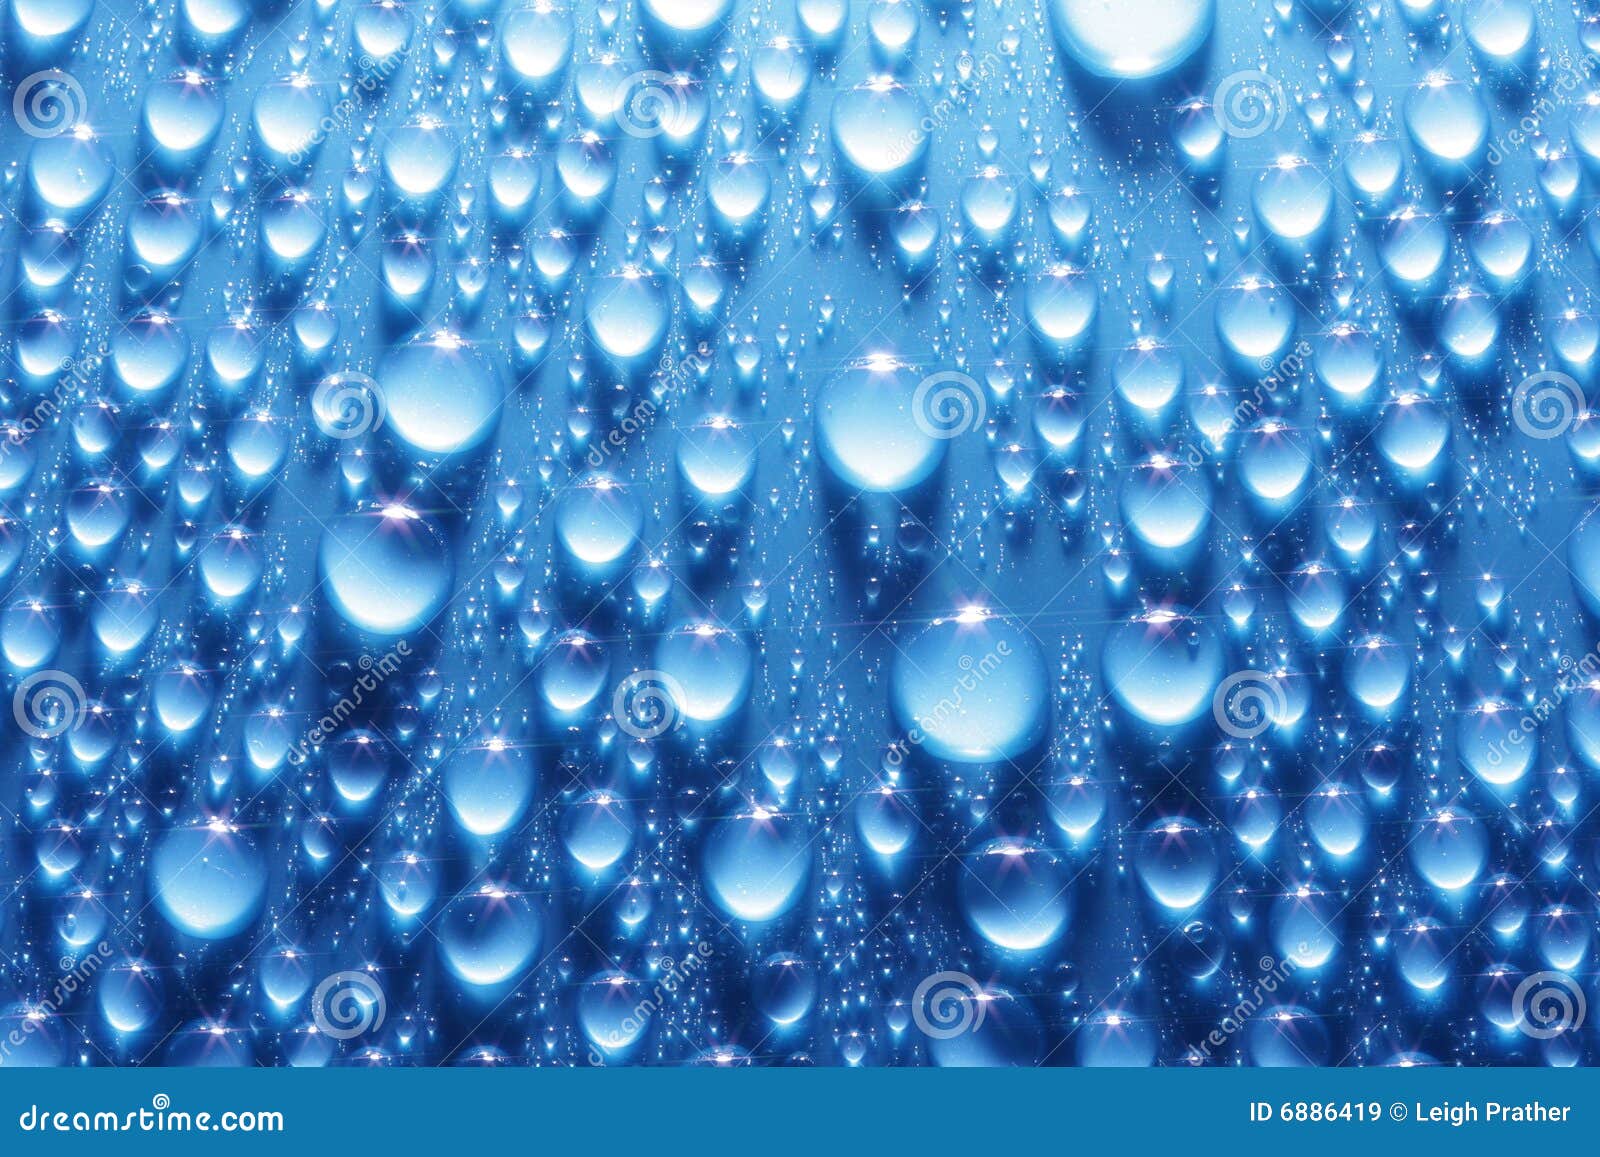 13,441 Blue Water Beads Royalty-Free Images, Stock Photos & Pictures